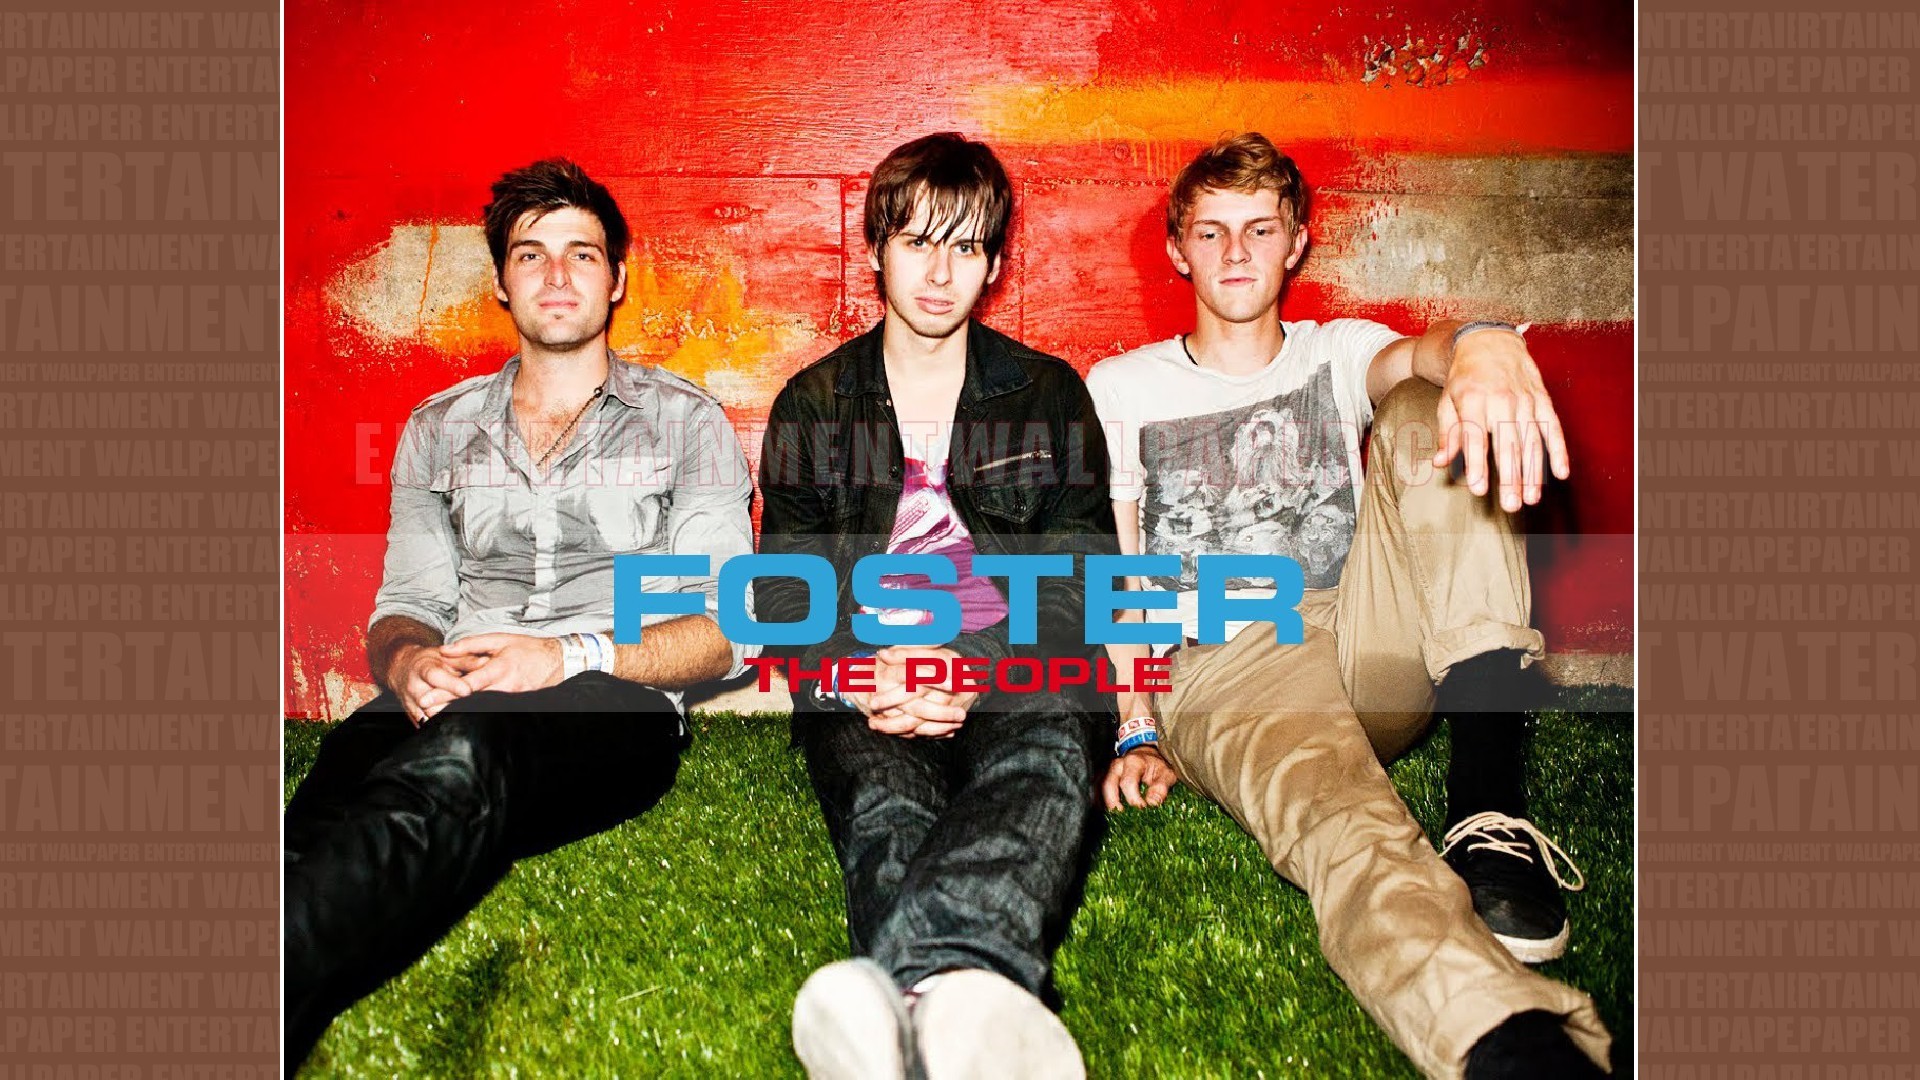 1920x1080 Foster the People Wallpaper - Original size, download now.